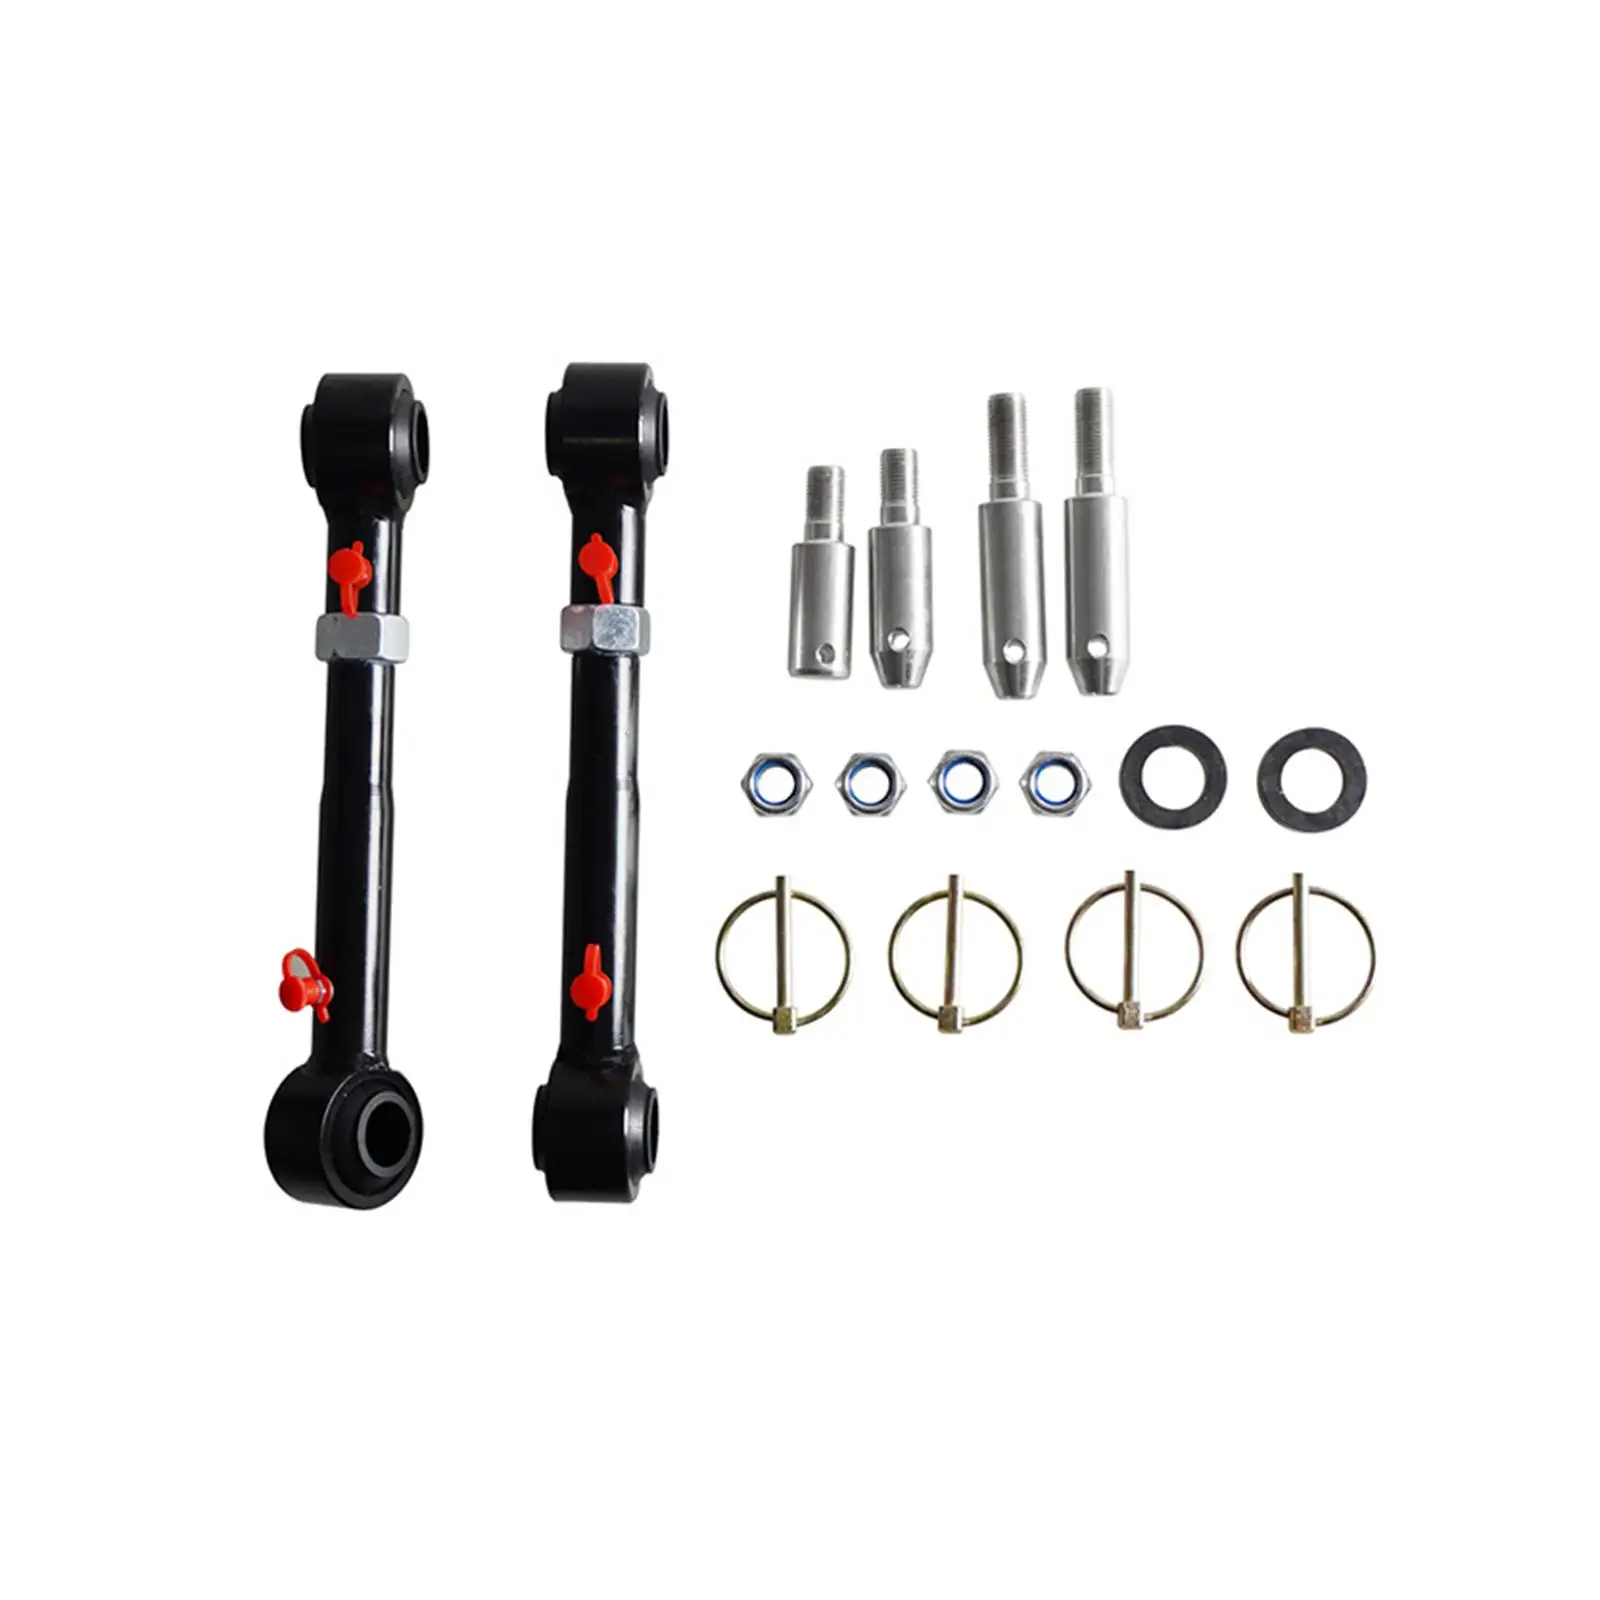 Car Adjustable Front Swaybar Direct Replaces Repair Parts Sway Bar Link Bushings Front Kit for Jeep Wrangler 2007-2018